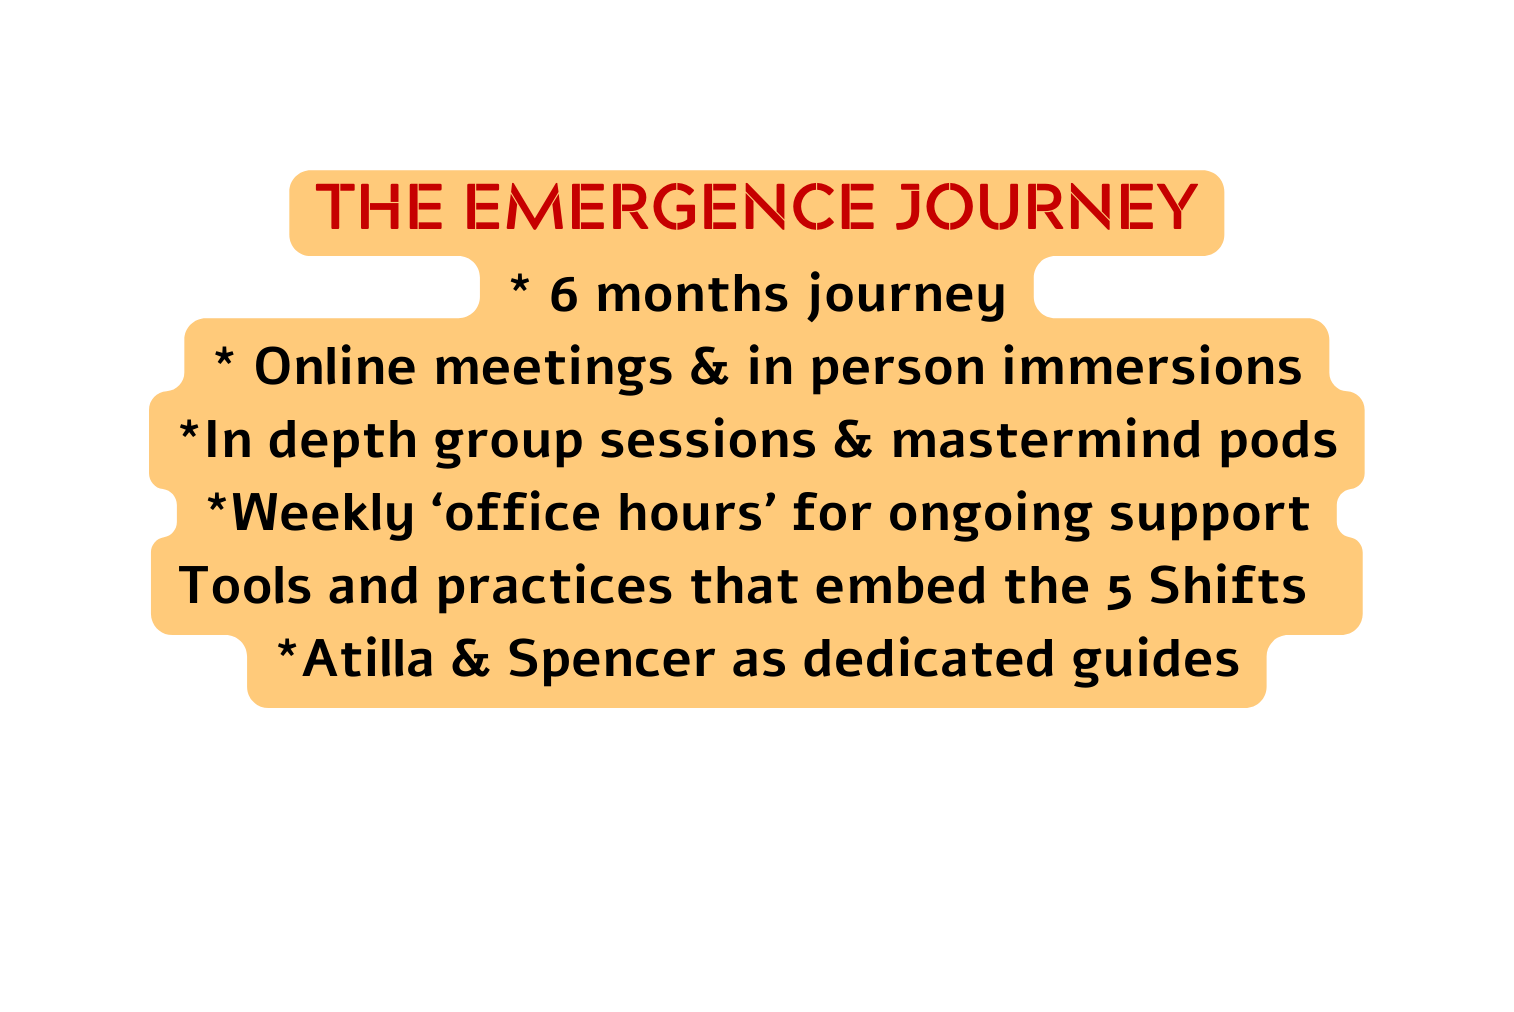 THE EMERGENCE JOURNEY 6 months journey Online meetings in person immersions In depth group sessions mastermind pods Weekly office hours for ongoing support Tools and practices that embed the 5 Shifts Atilla Spencer as dedicated guides